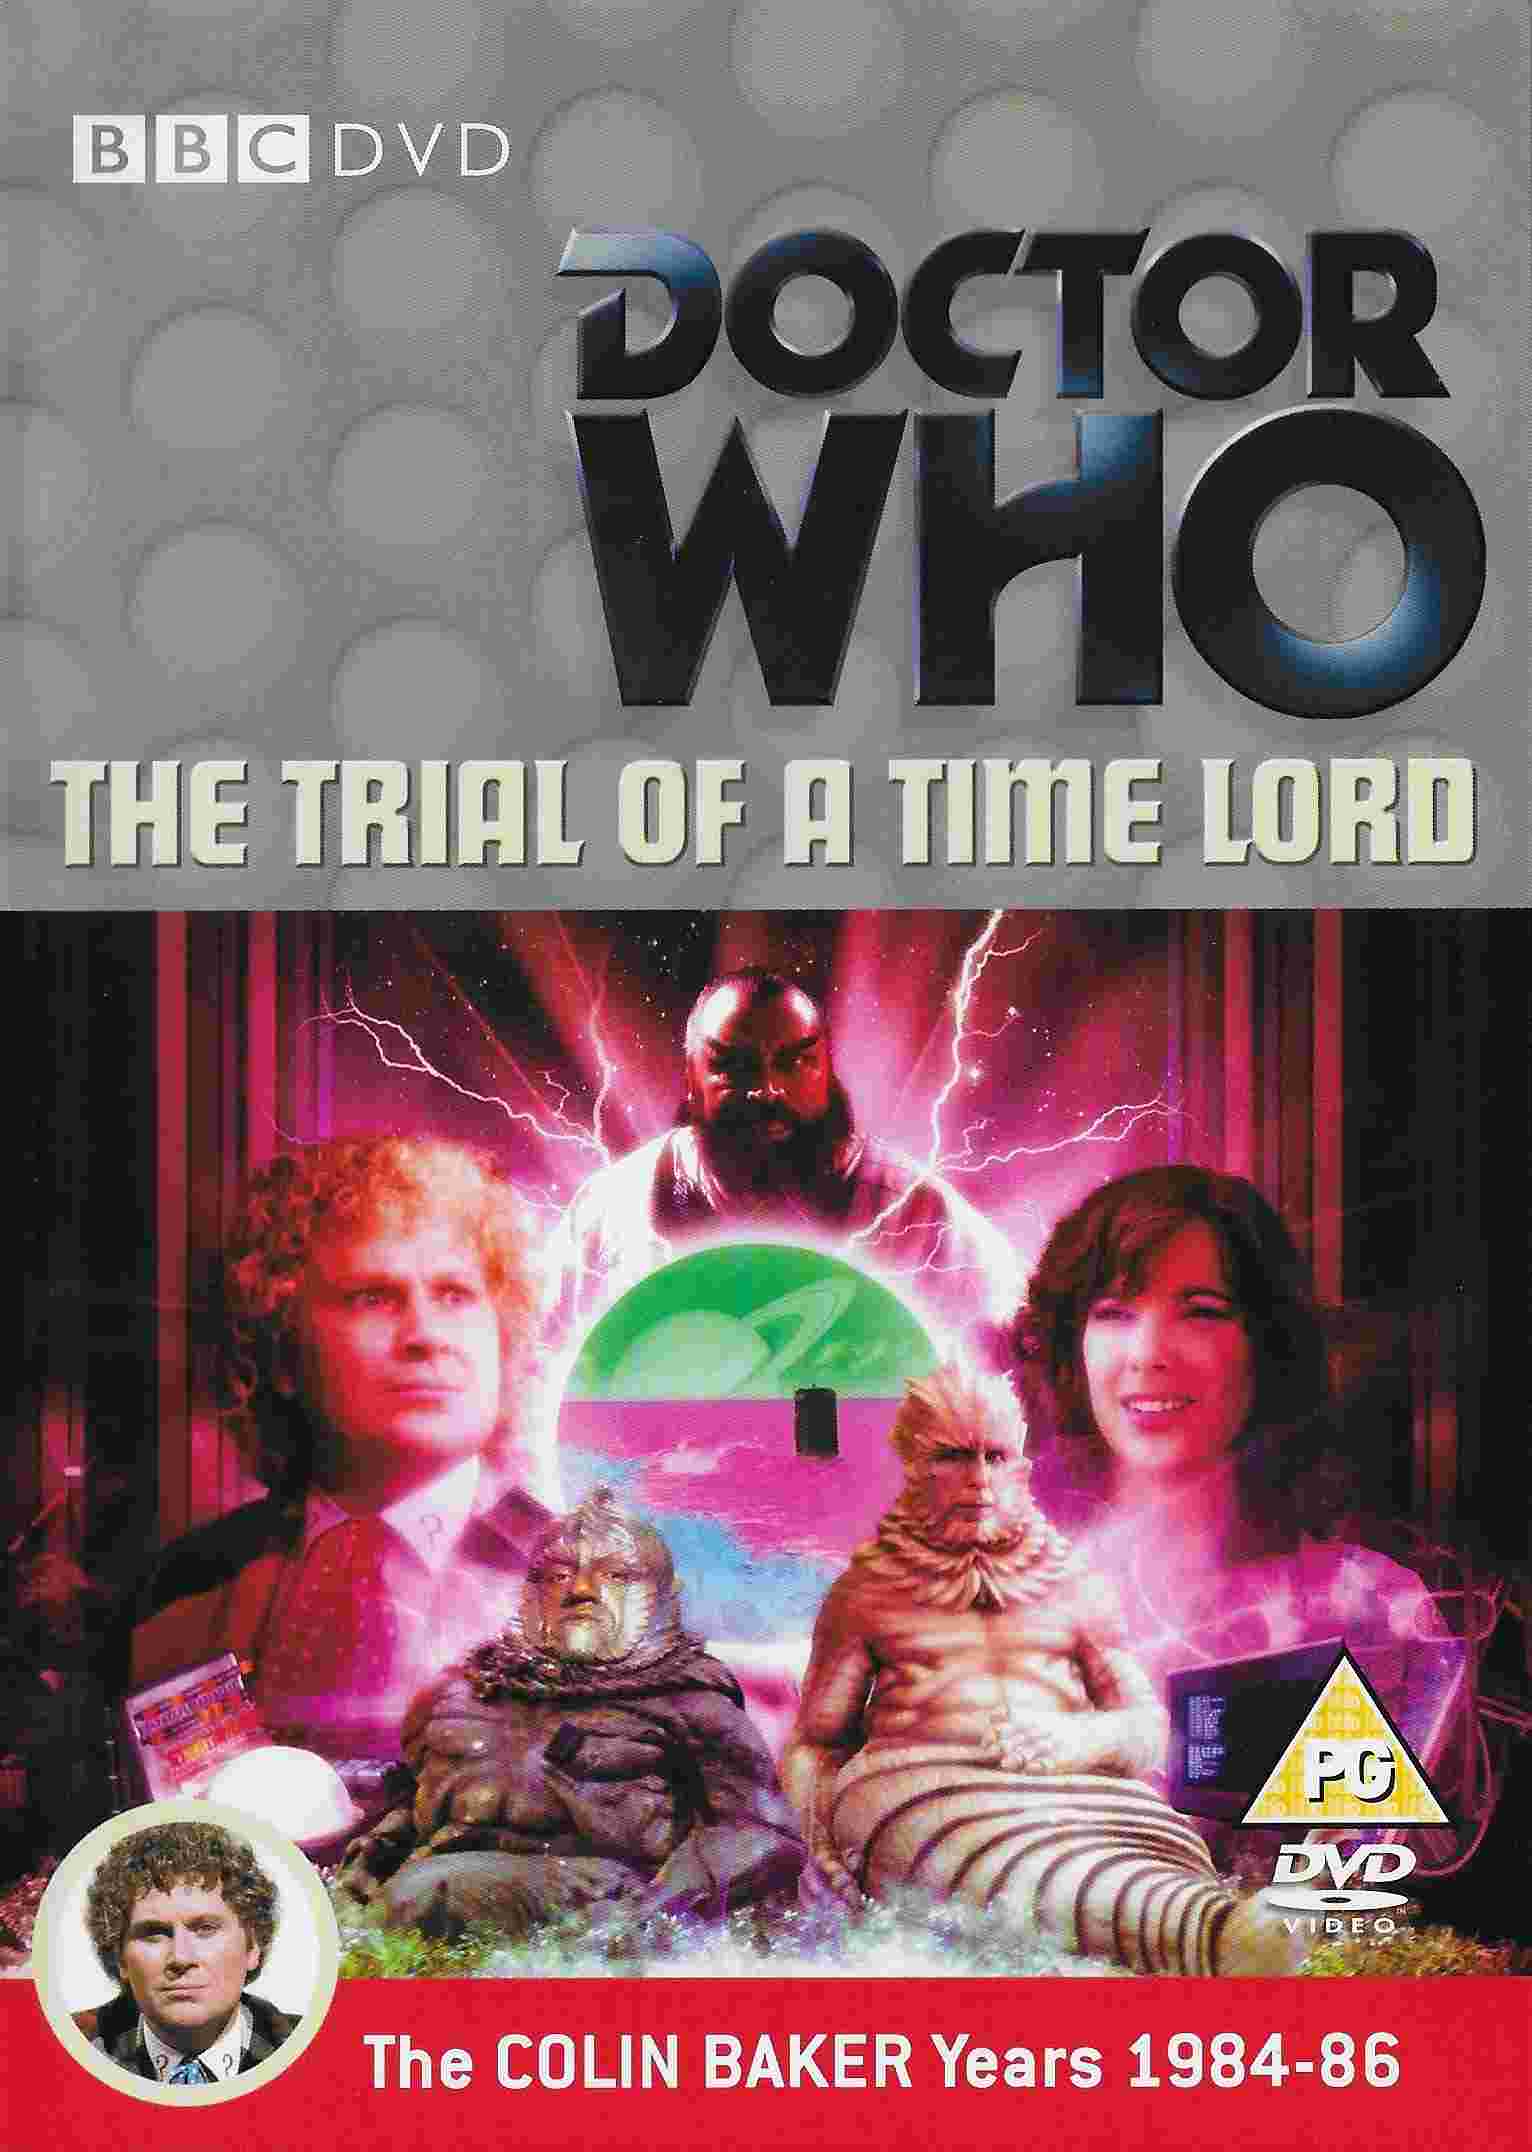 Picture of BBCDVD 2422B Doctor Who - The trial of a Time Lord - Parts 5-8 - Mindwarp by artist Philip Martin from the BBC records and Tapes library